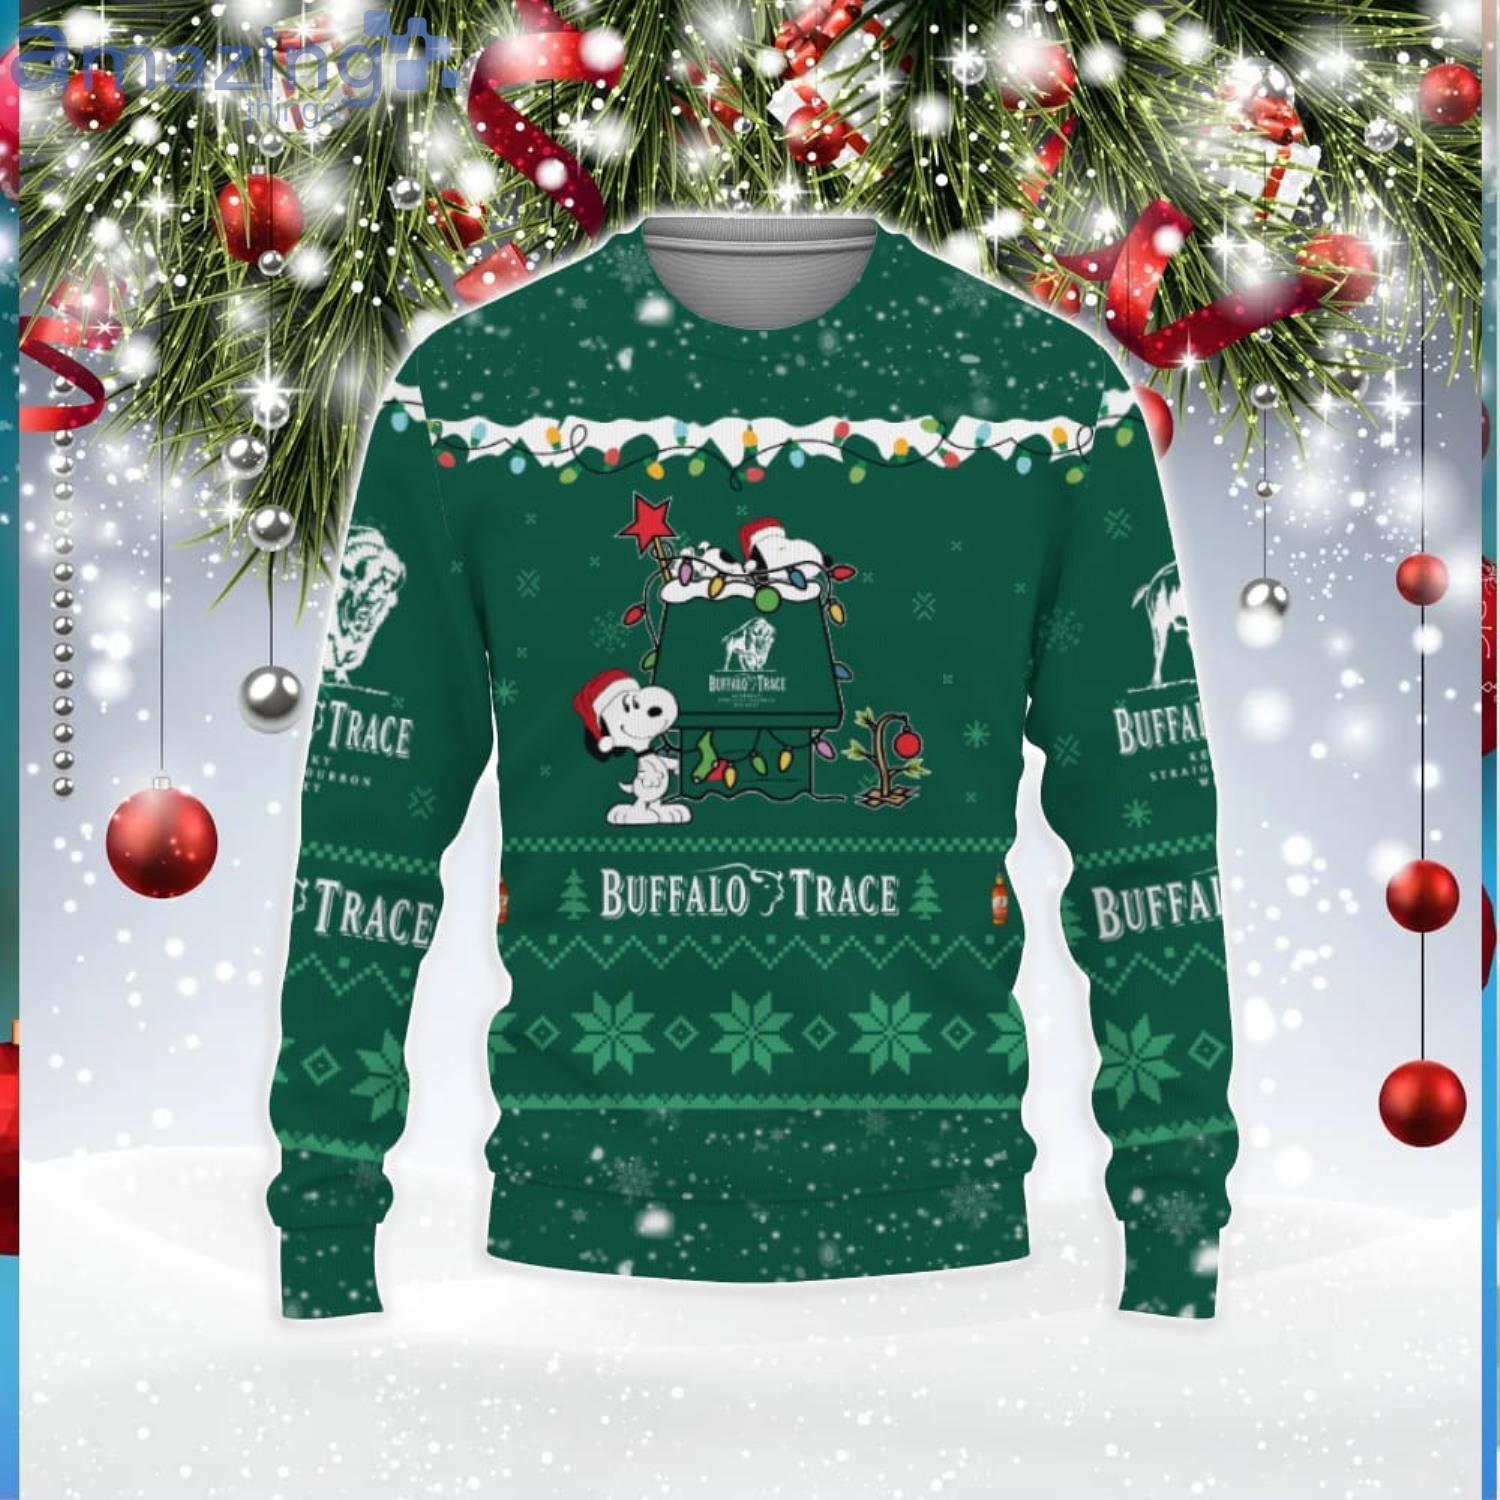 Buffalo Trace Whiskey American Whiskey Beers Merry Christmas Snoopy House Cute Gift 3D Ugly Christmas Sweater Product Photo 1